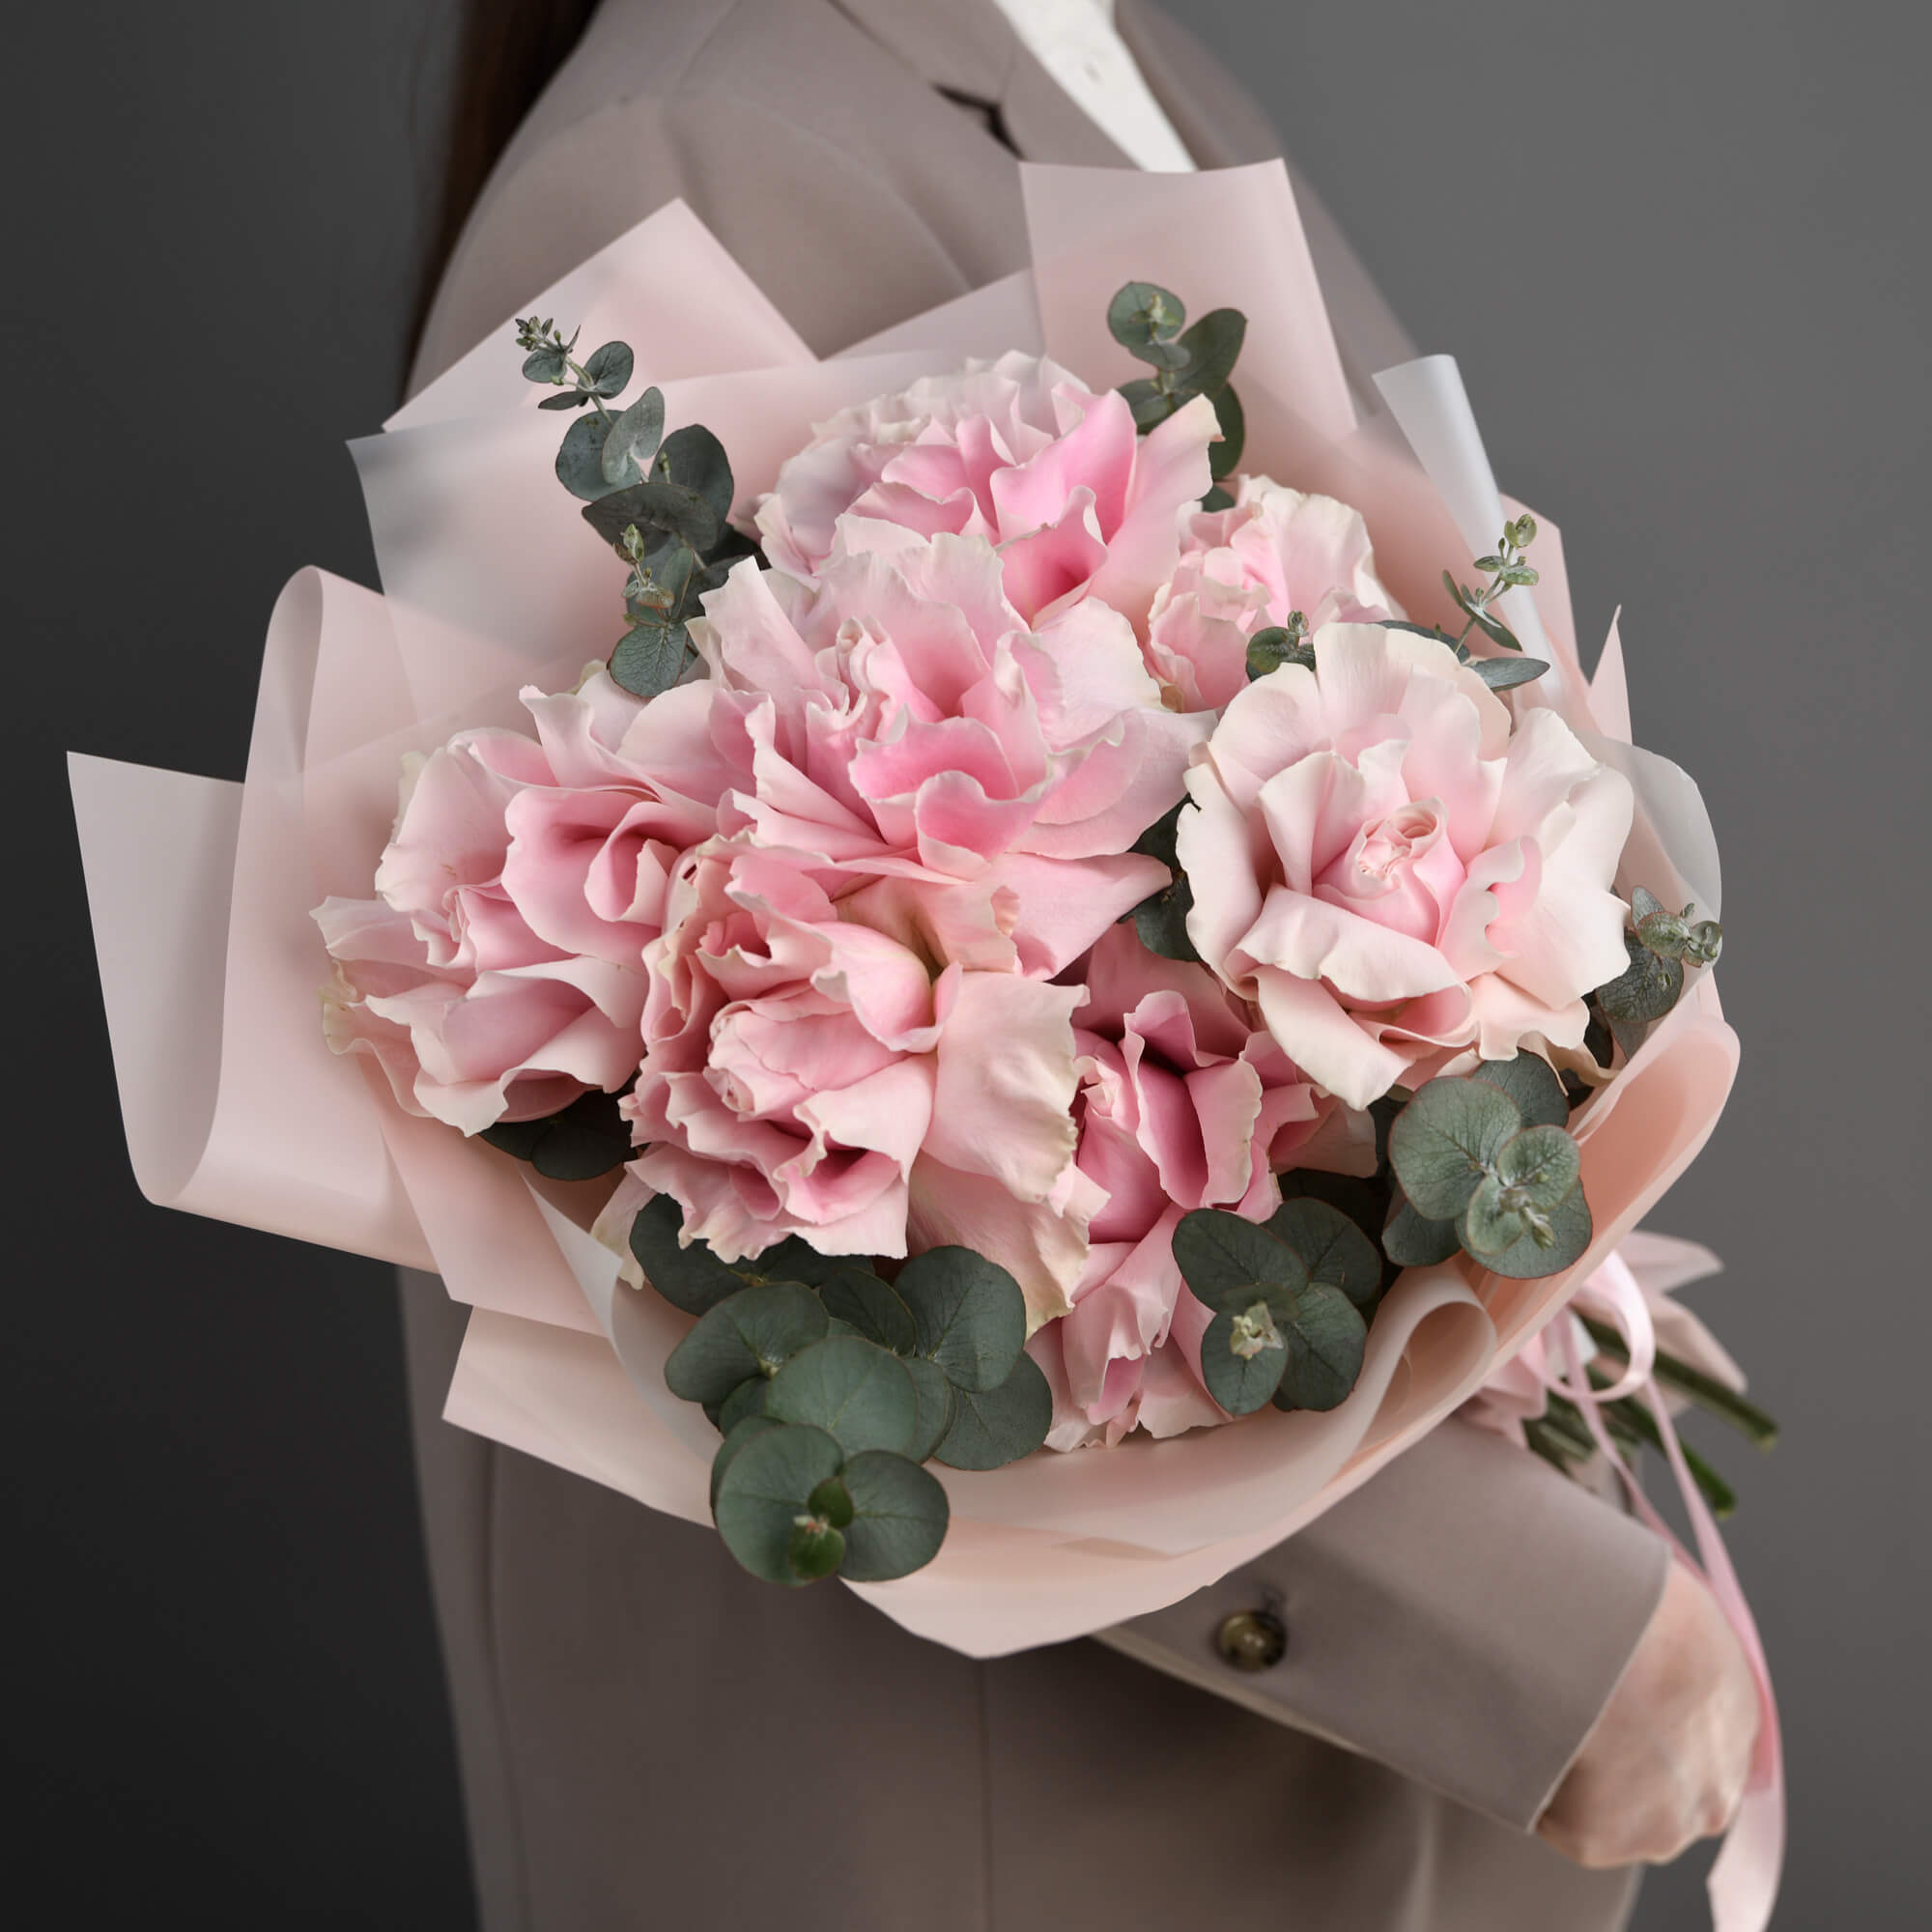 Bouquet of 9 special pink roses and eucalyptus